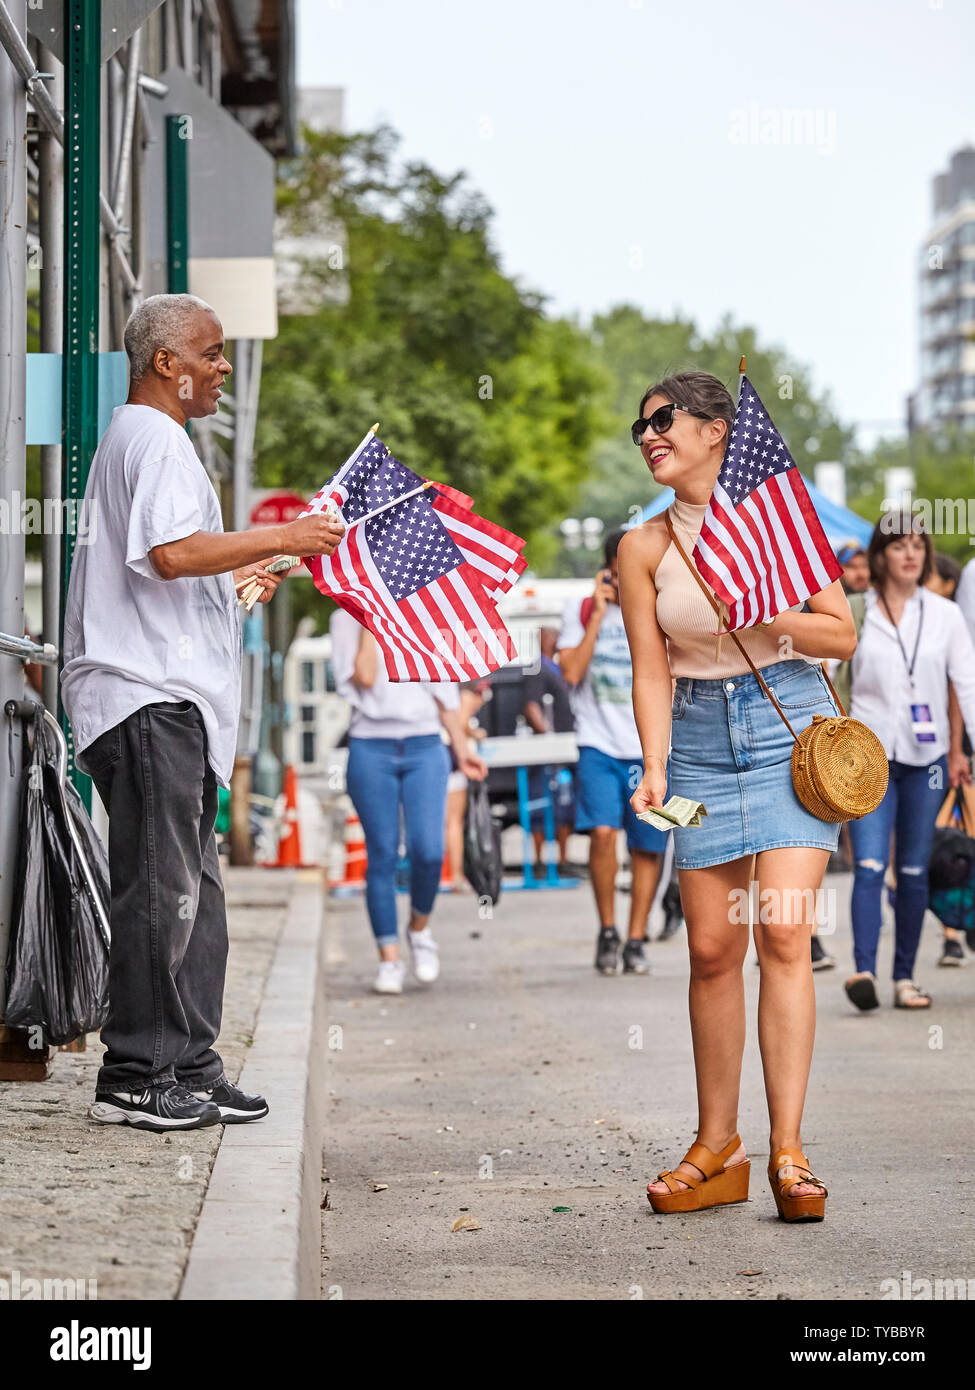 New York, USA - July 04, 2018: Woman buys American Flag during federal holiday in the United States commemorating the Declaration of Independence. Stock Photo